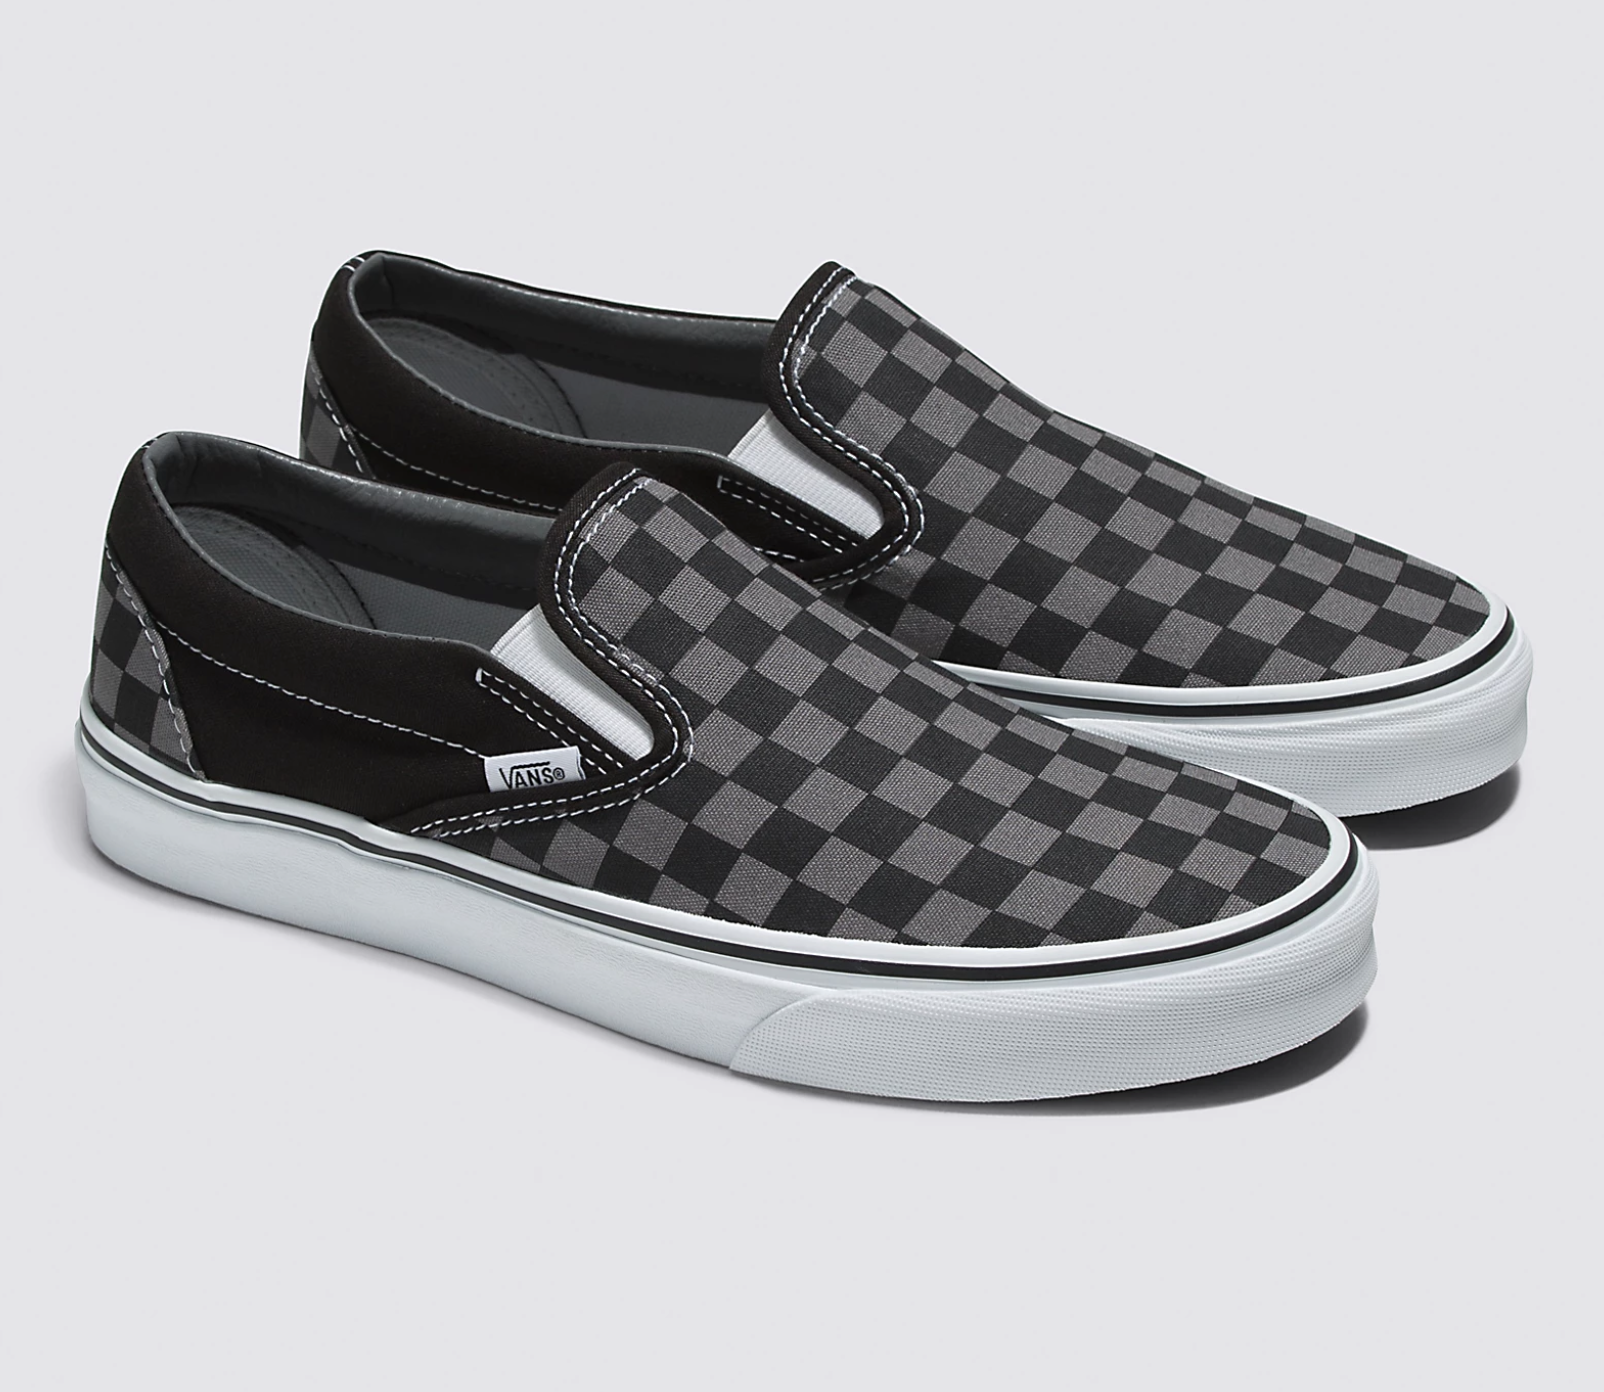 SLIP-ON CHECKERBOARD SHOE - BLACK/PEWTER CHECK